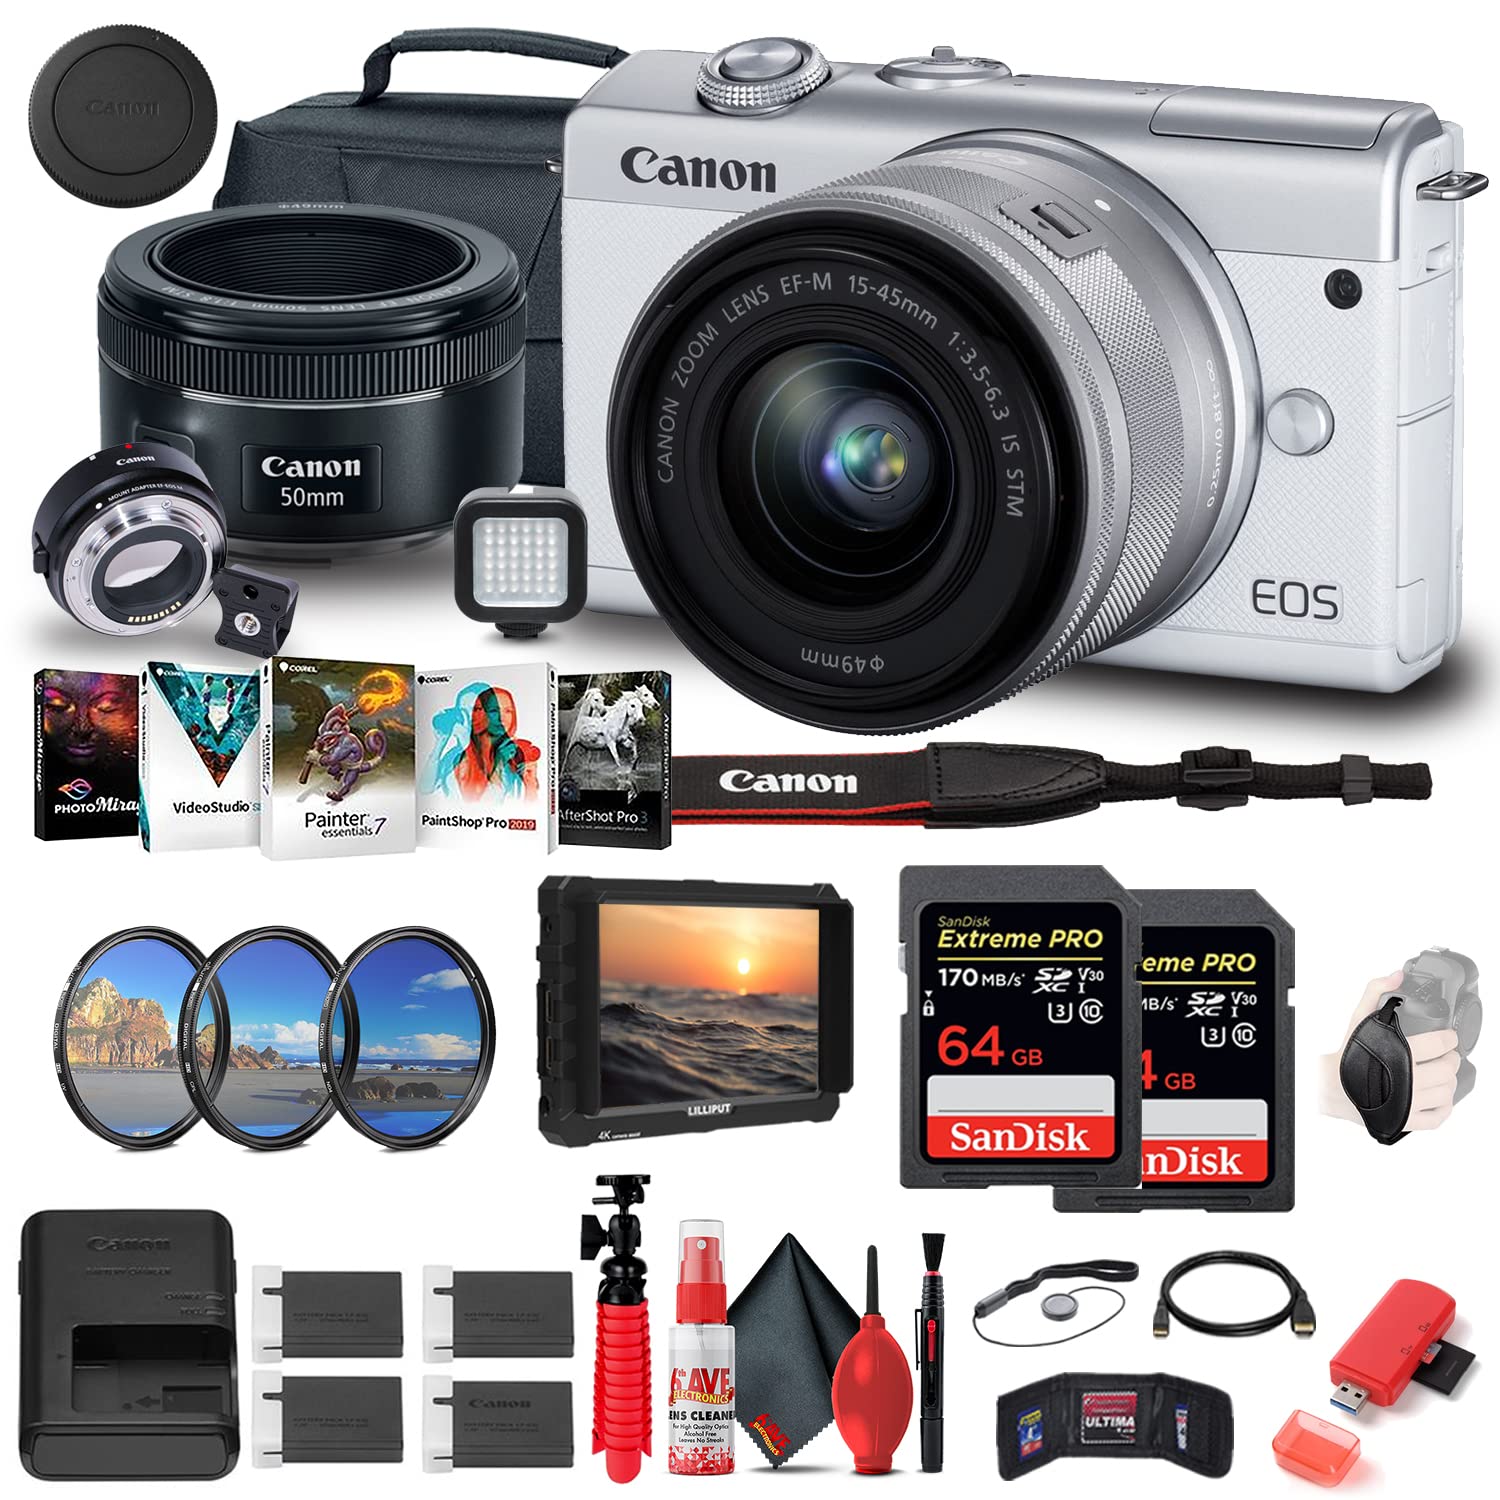 Canon EOS M200 Mirrorless Digital Camera with 15-45mm Lens (White) (3700C009) + Canon EF-M Lens Adapter + 4K Monitor + Canon EF 50mm Lens + 2 x 64GB Card + Case + More (Renewed)